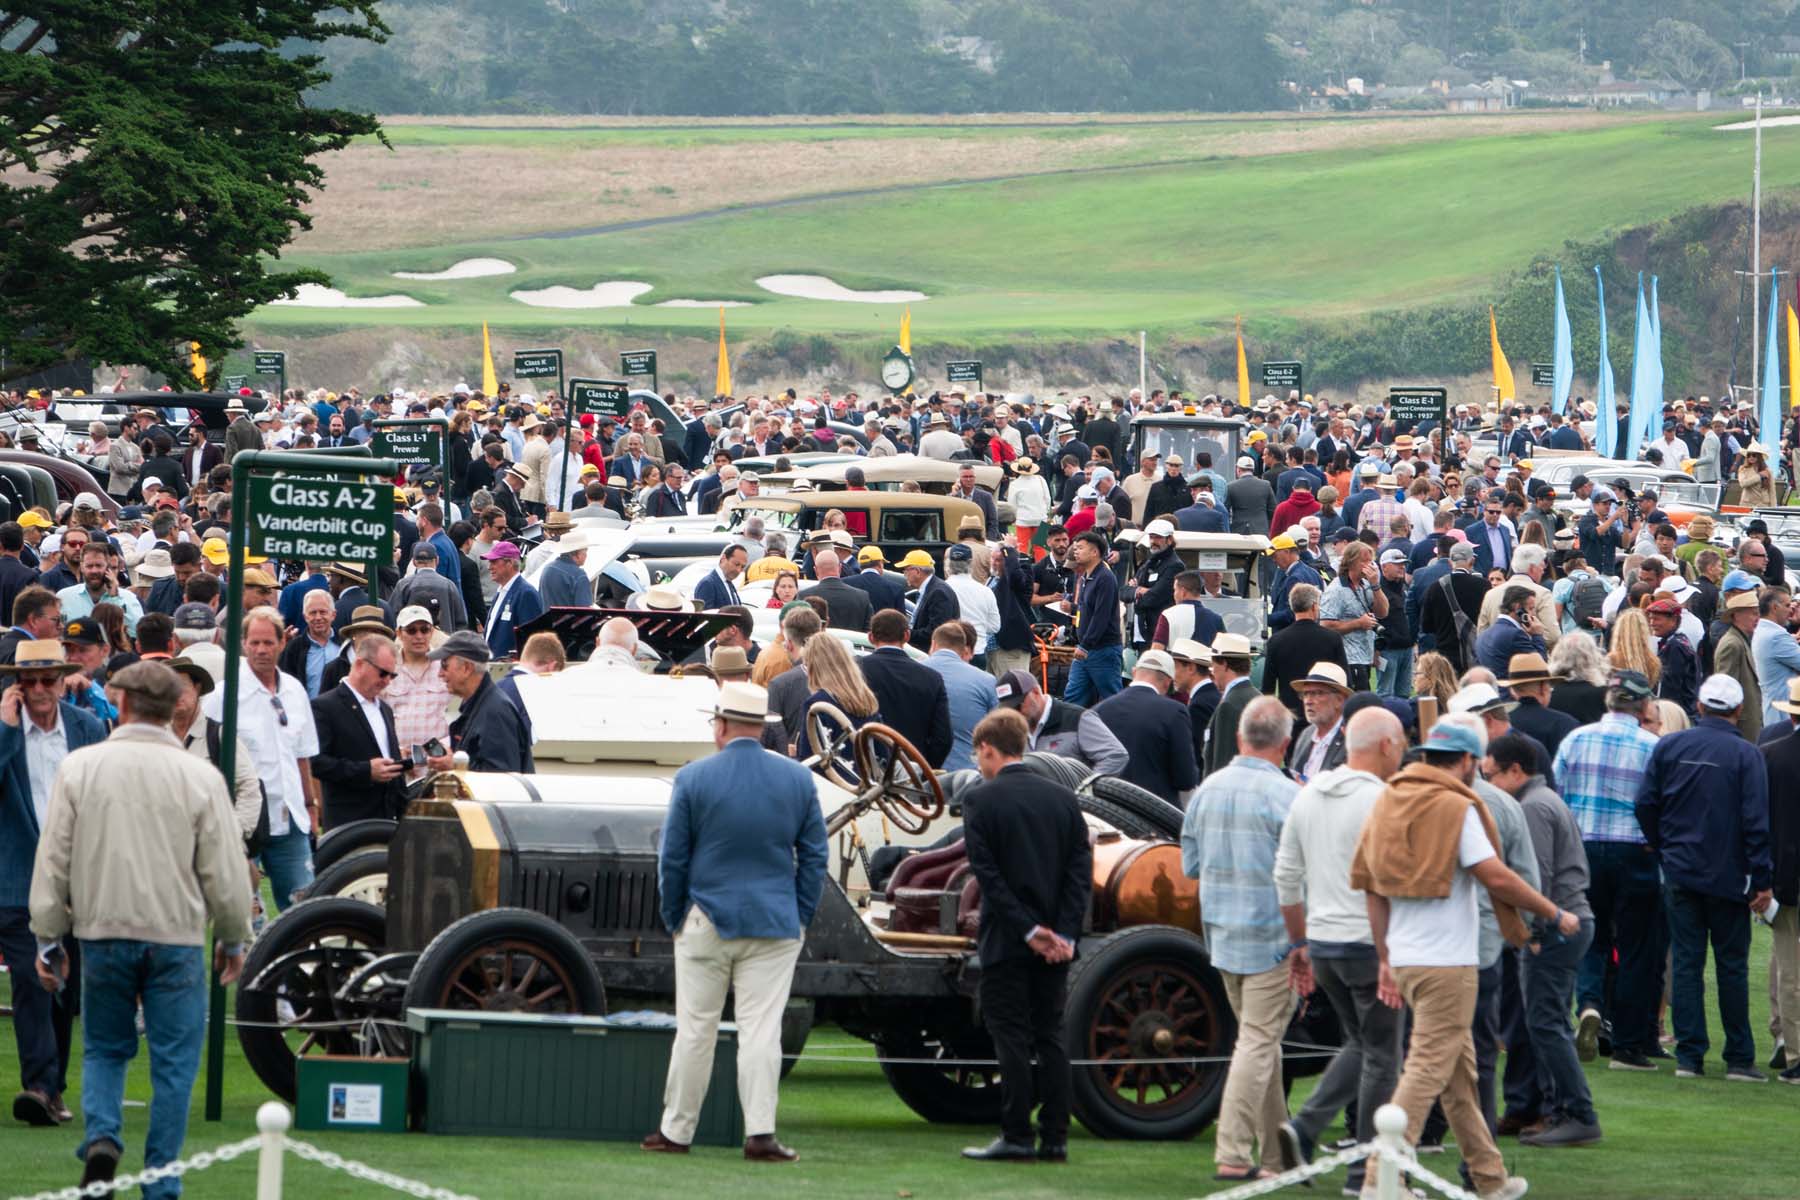 No shortage of patrons attending this year’s Pebble Beach Concours d’Elegance ®. Photo © 2023 Rolex Tom O'Neal